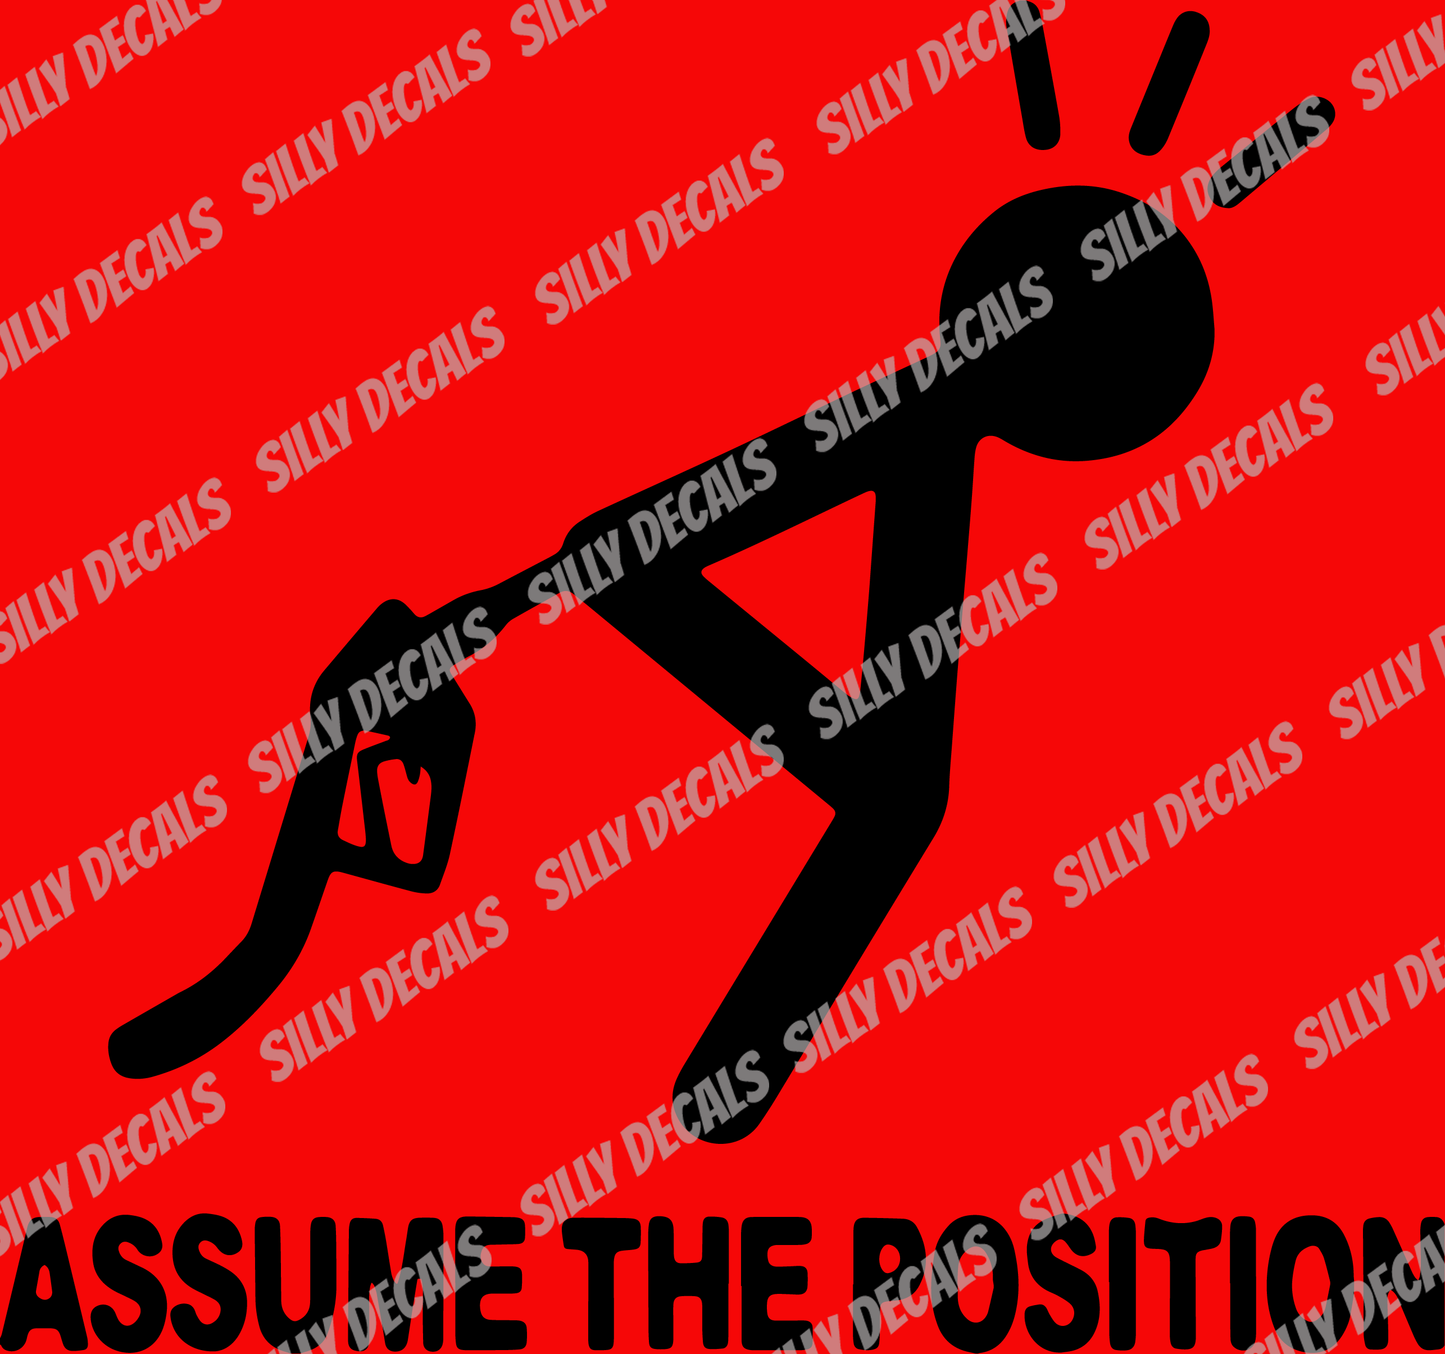 Assume The Position; Funny Vinyl Decals Suitable For Cars, Windows, Walls, and More!